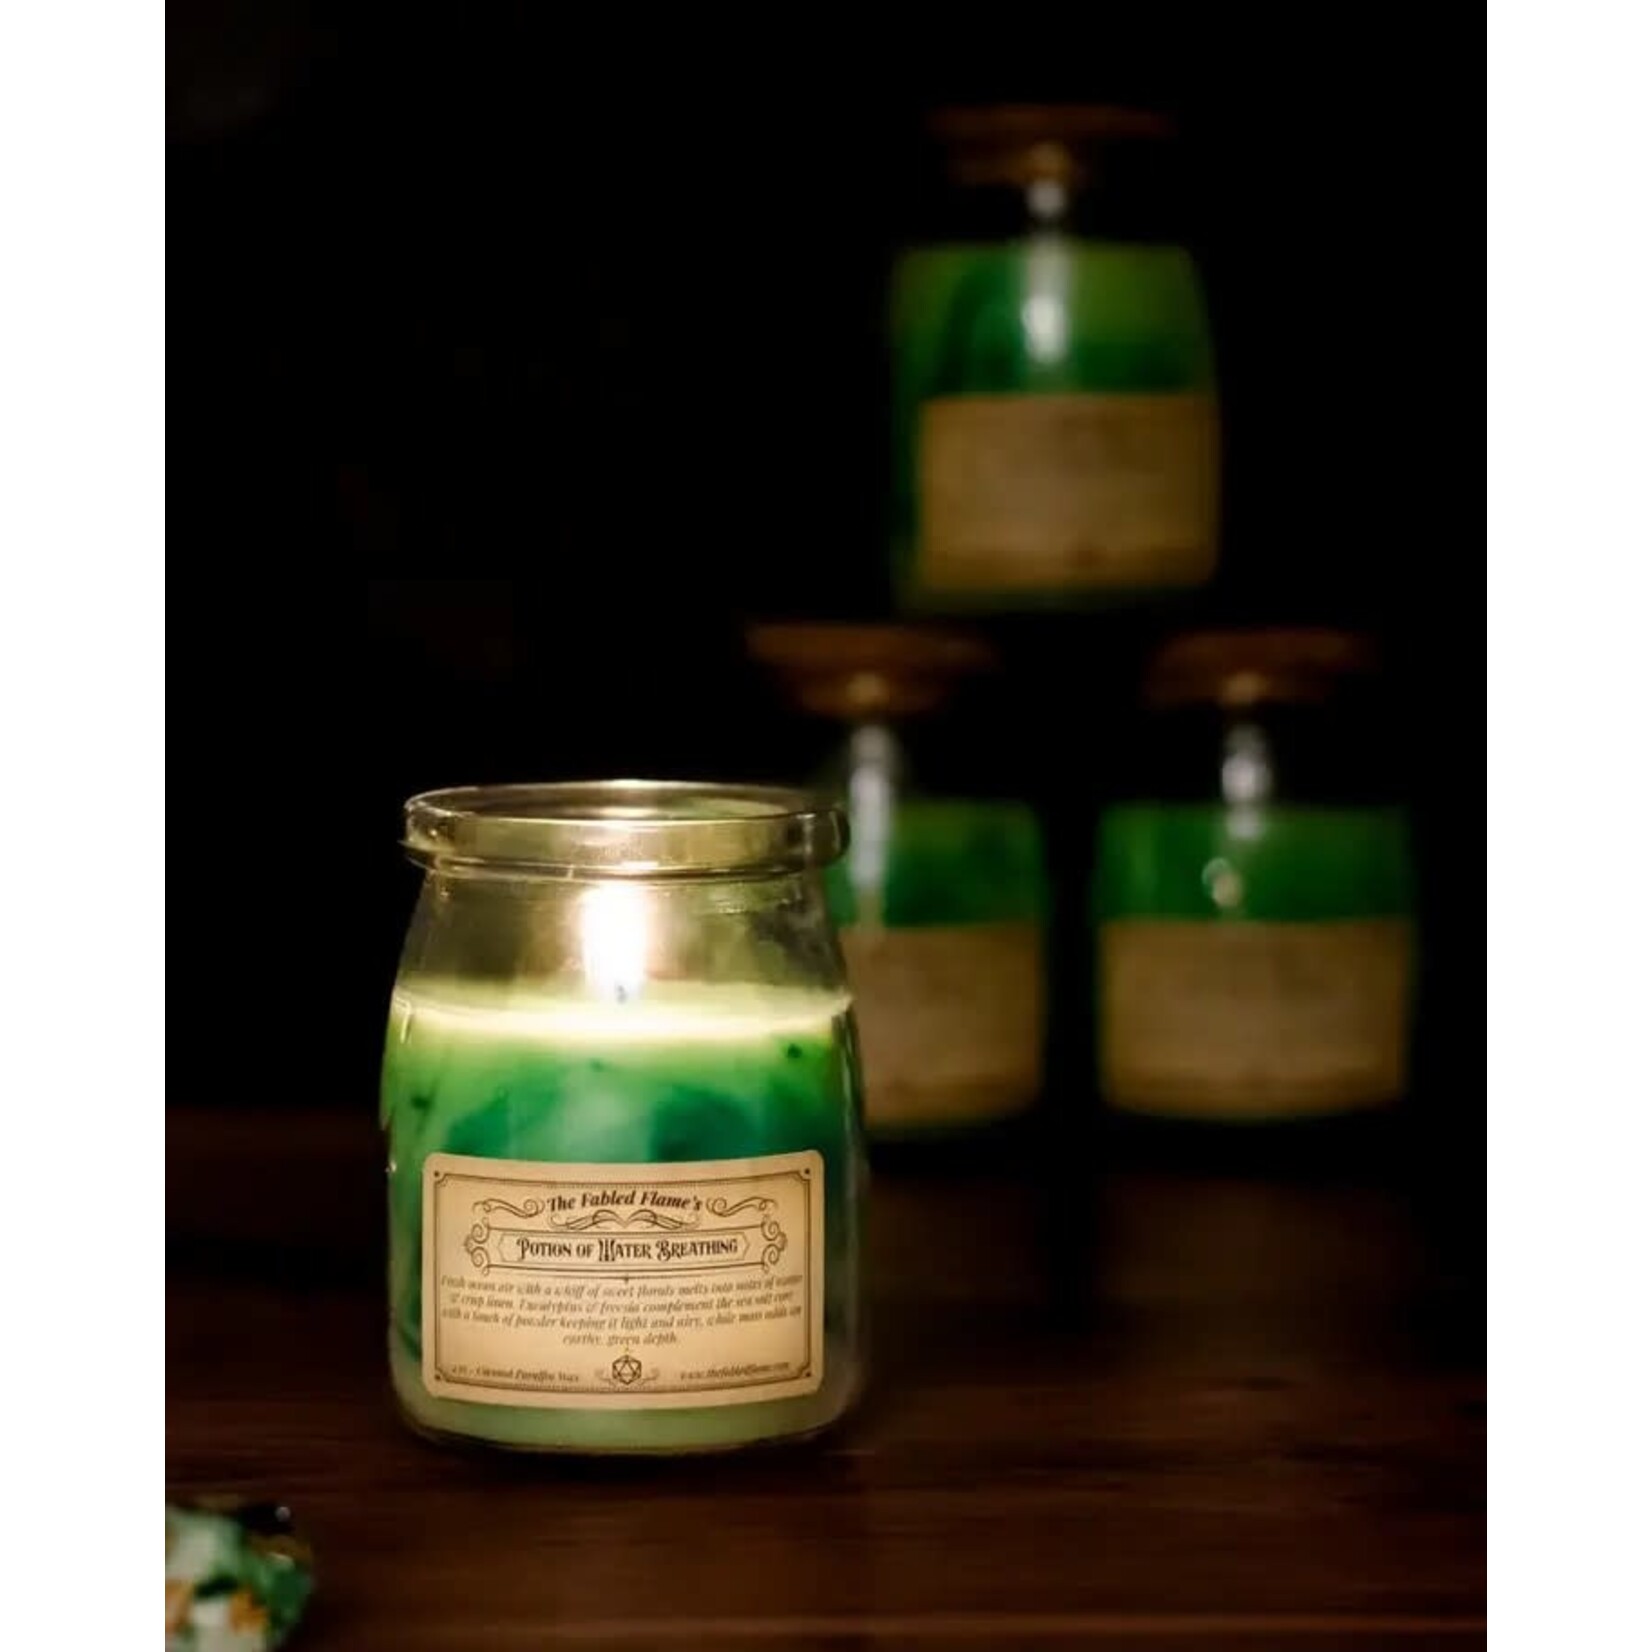 Potion Bottle Candle by Fabled Flame